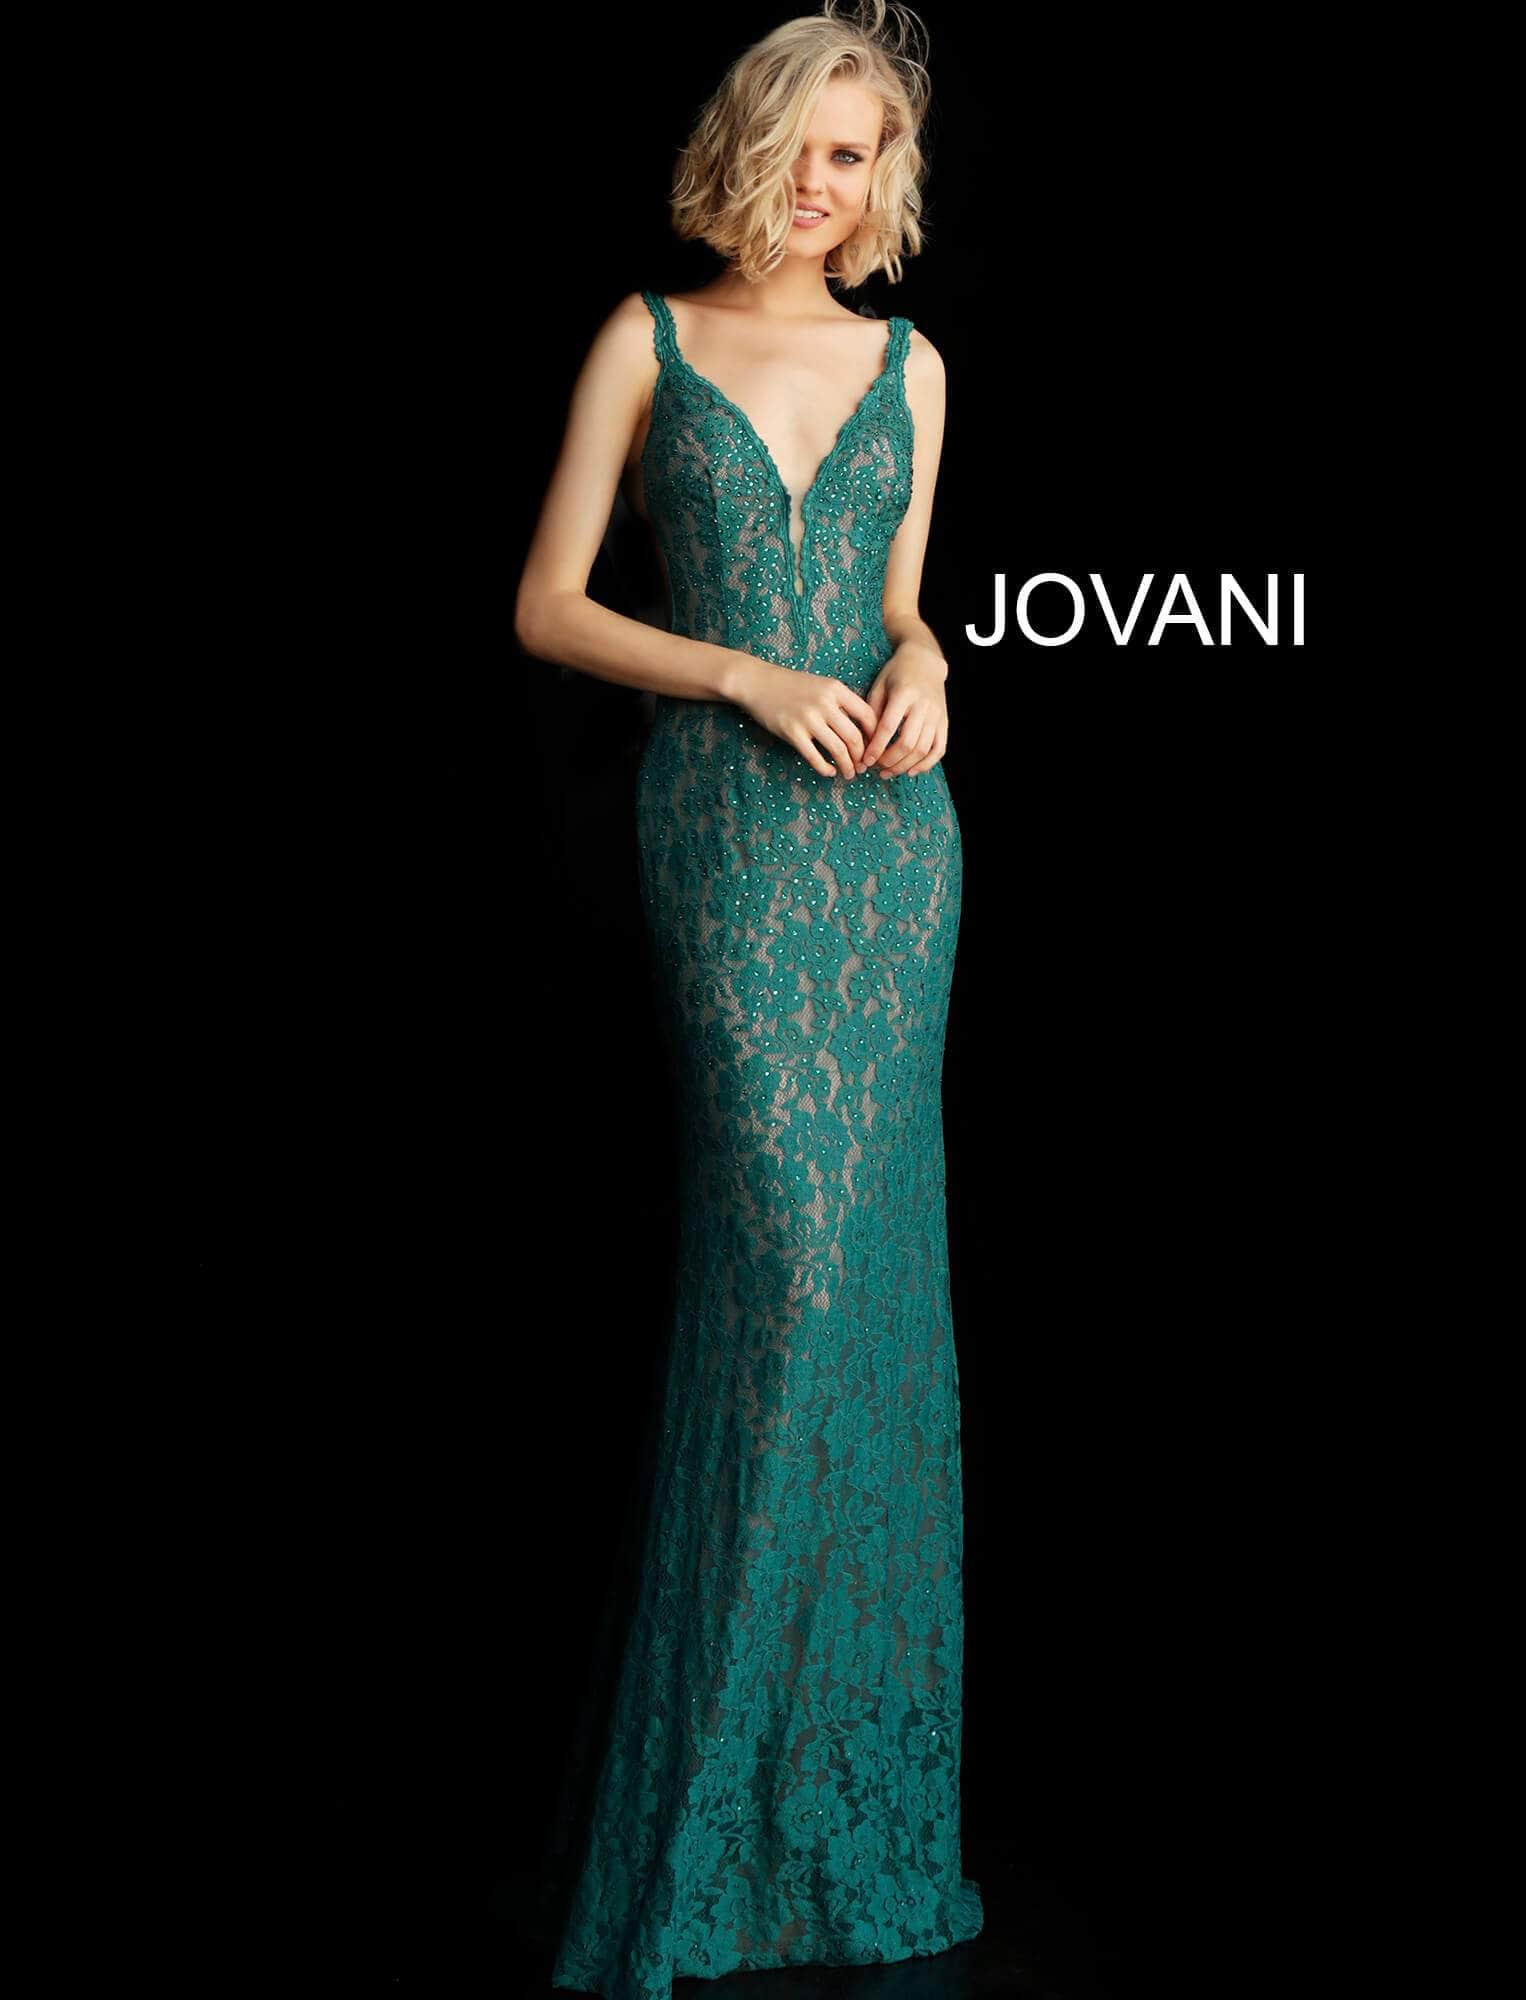 Jovani - Fitted Lace Prom Dress 48994
